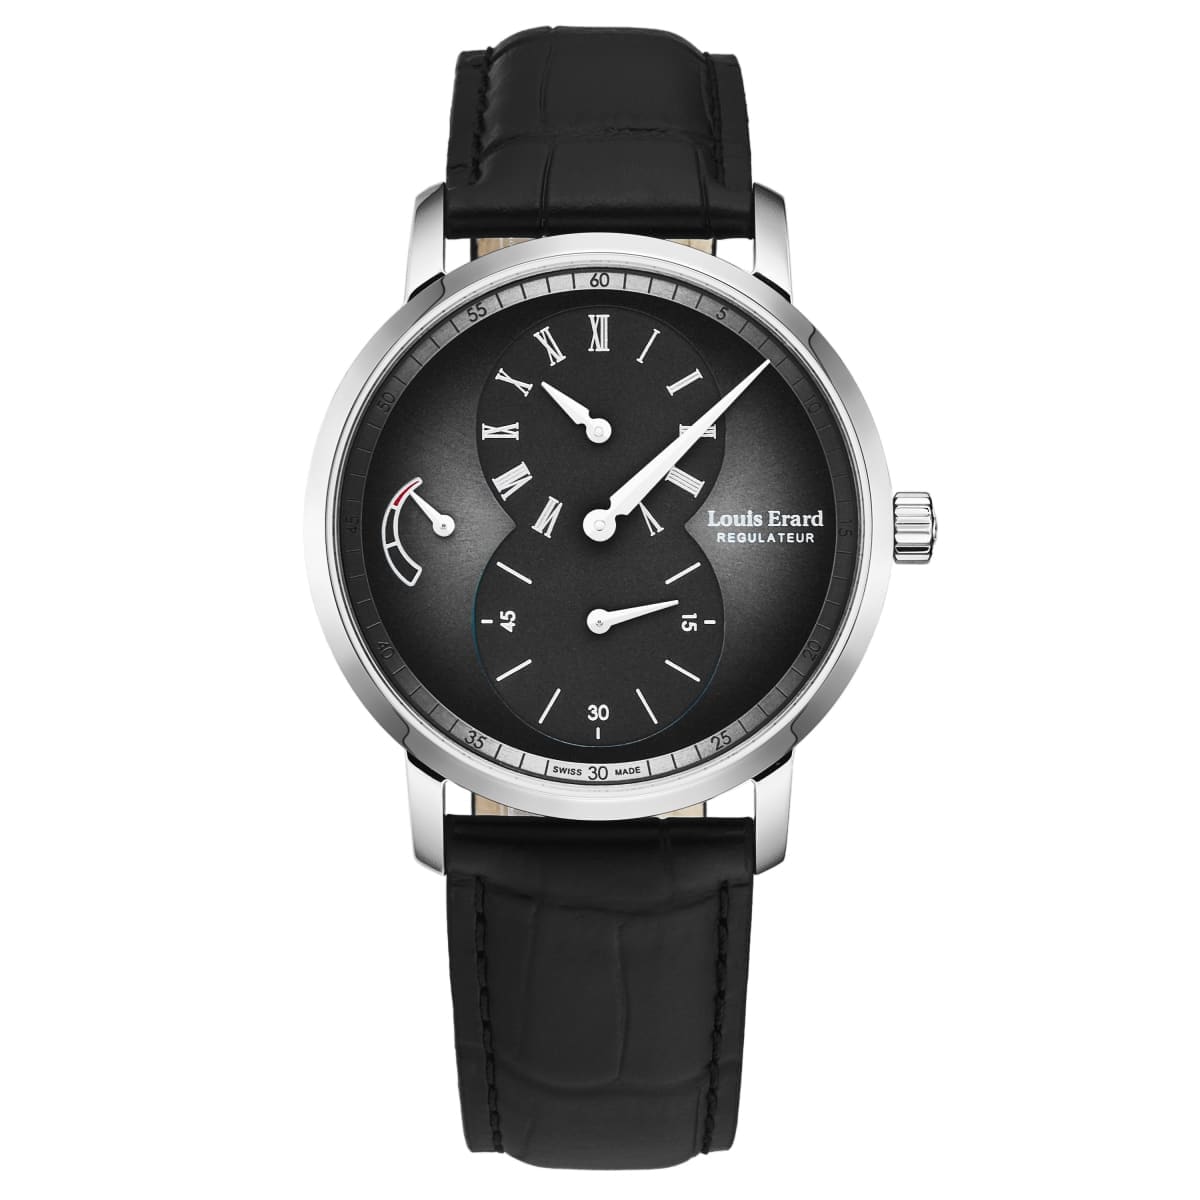 Louis Erard Men’s ’Excellence’ Black Dial Leather Strap Manual Wind Watch 54230AG52.BDC02 - On sale